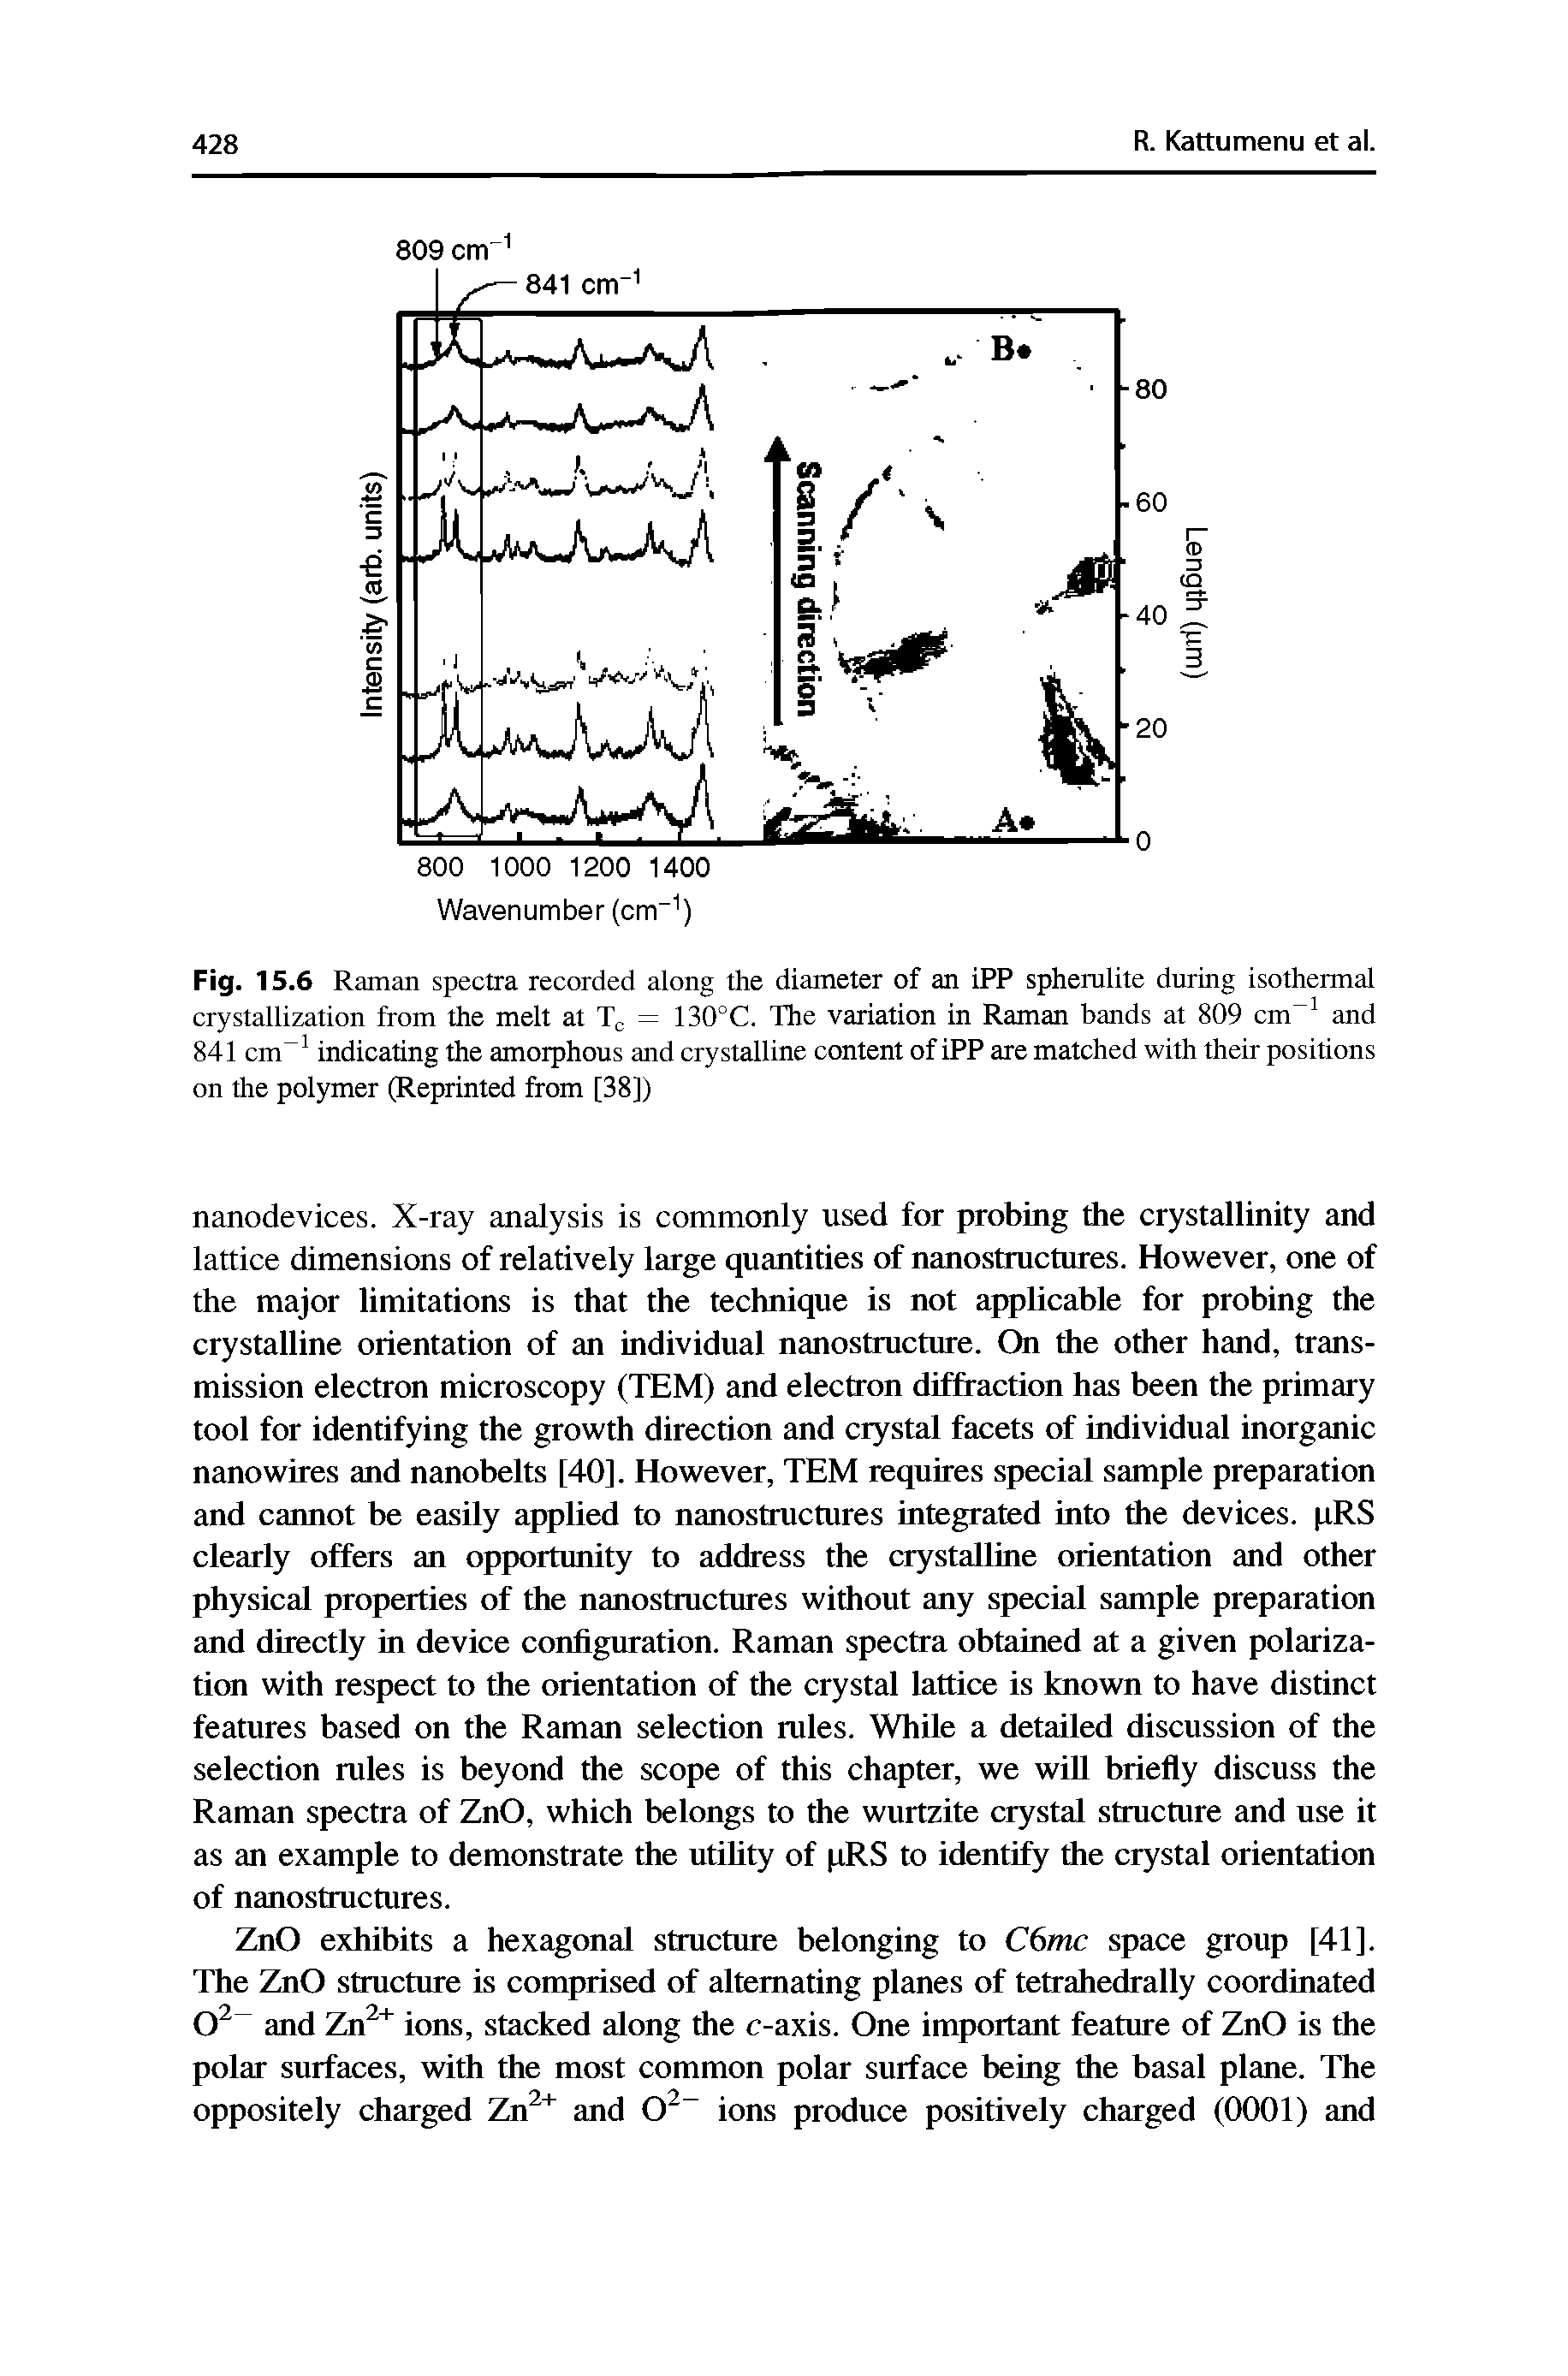 Fig. 15.6 Raman spectra recorded along the diameter of an iPP spherulite during isothermal crystallization from the melt at Tj, = 130°C. The variation in Raman bands at 809 cm and 841 cm indicating the amorphous and crystalline content of iPP are matched -with their positions on the polymer (Reprinted from [38])...